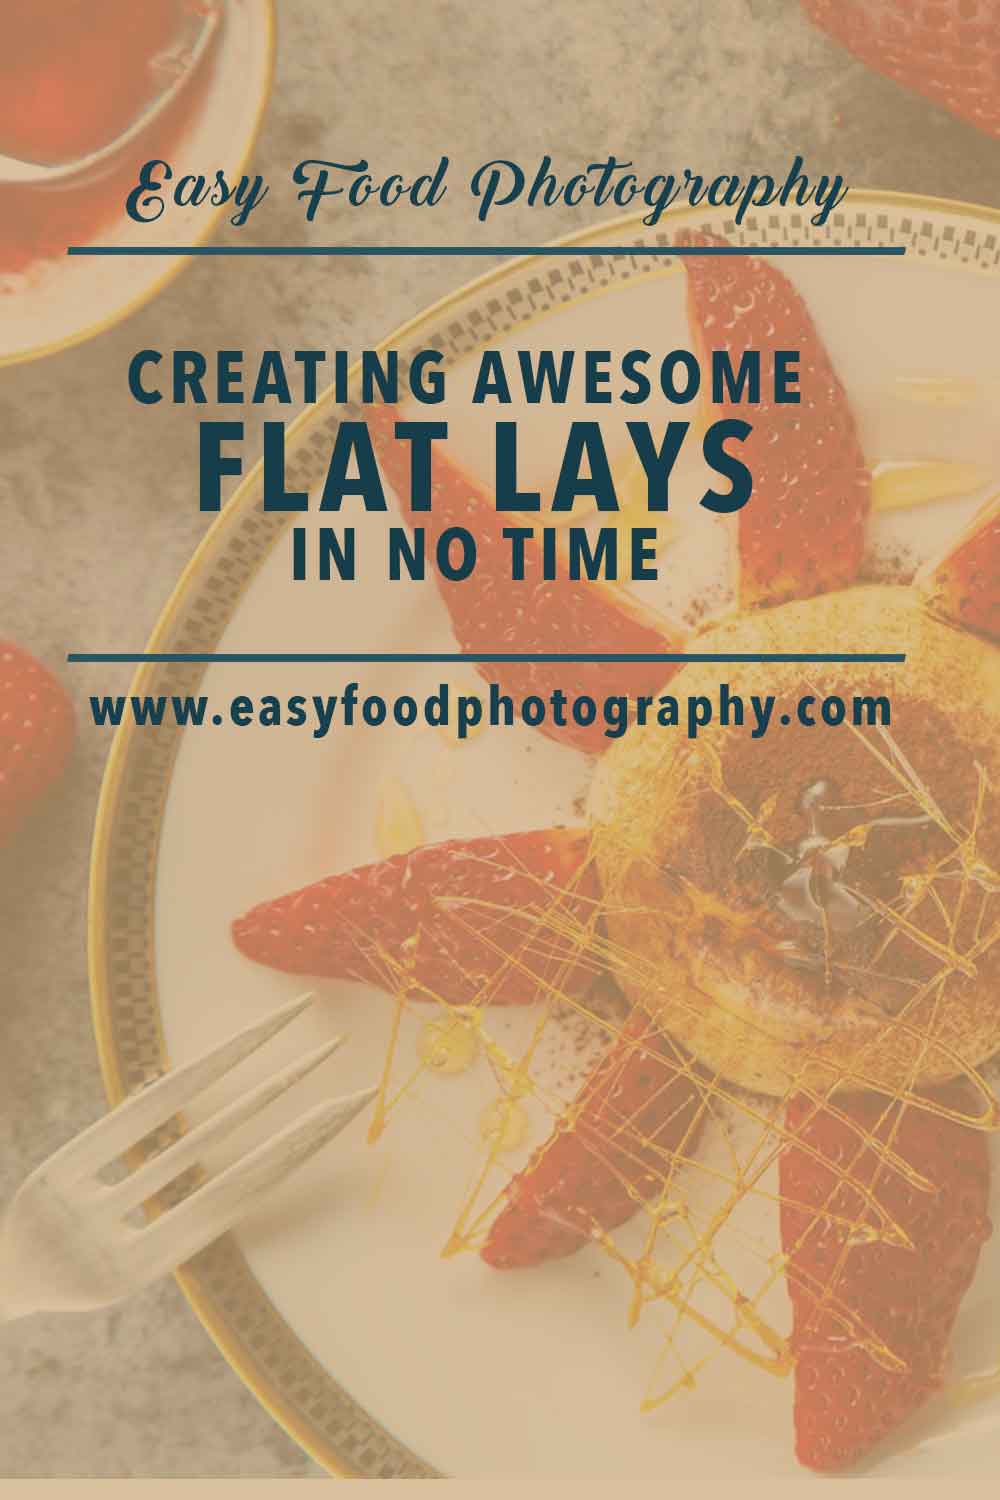 CREATING AWESOME FLAT LAYS  IN NO TIME